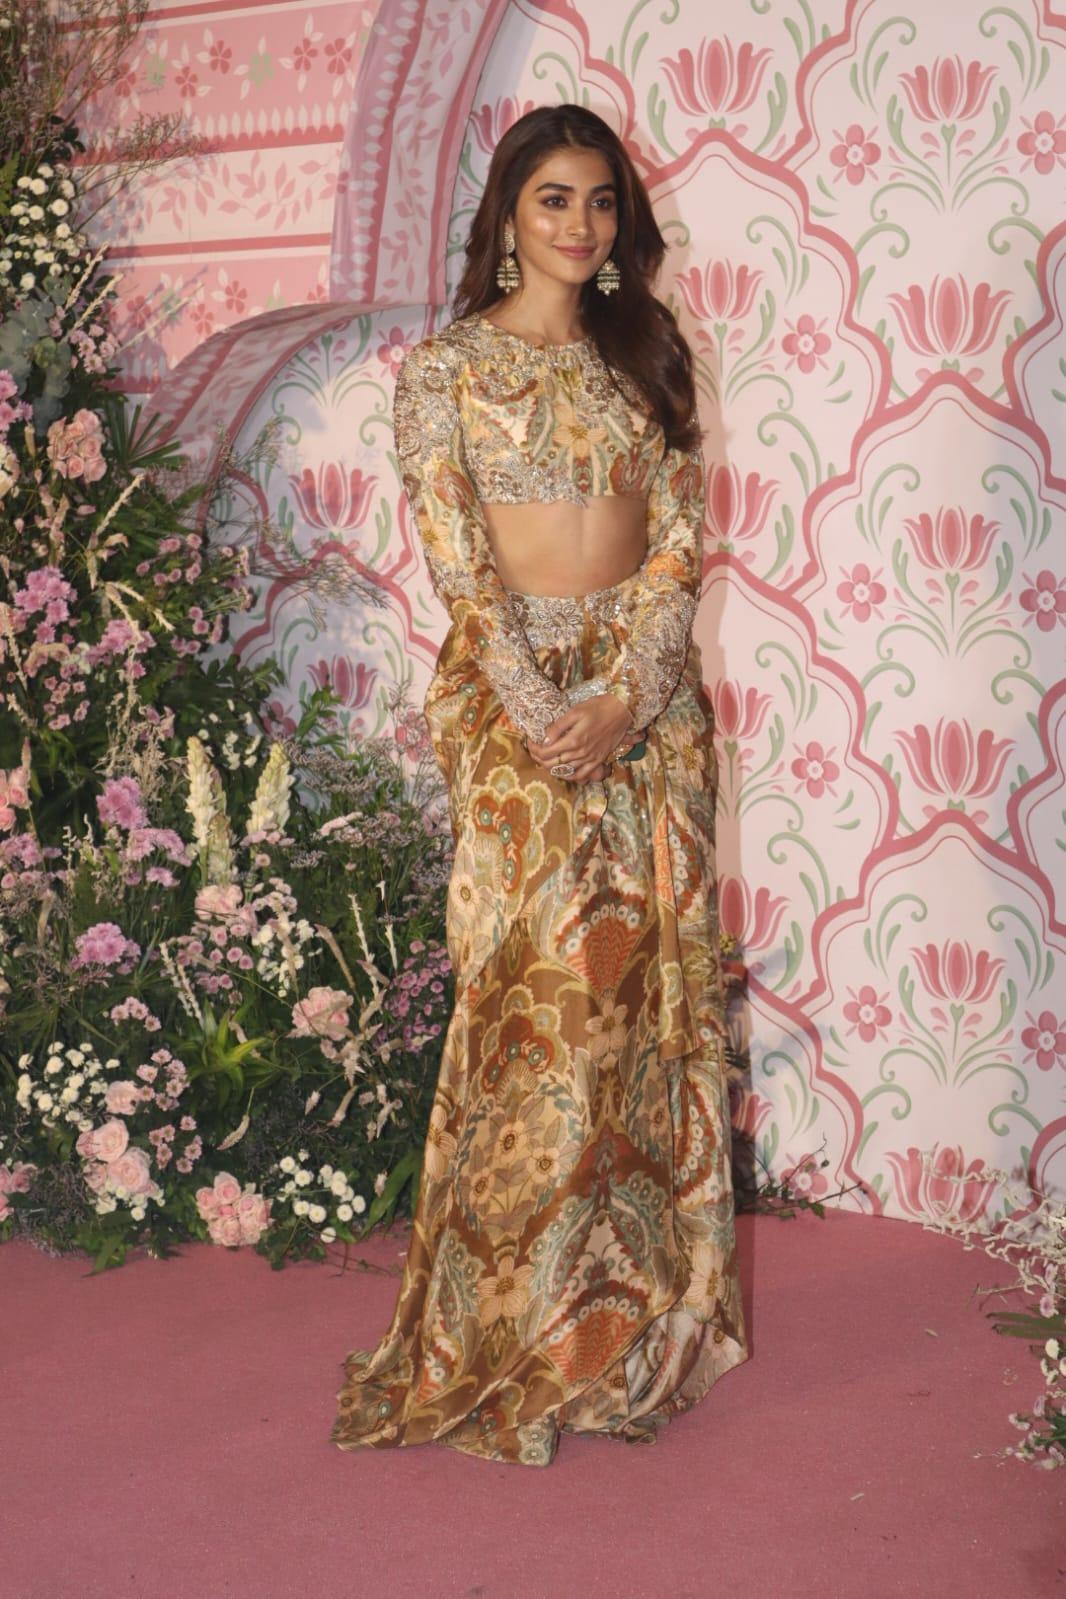 Pooja Hegde upped the glam quotient in this two-piece stylish gold lehenga